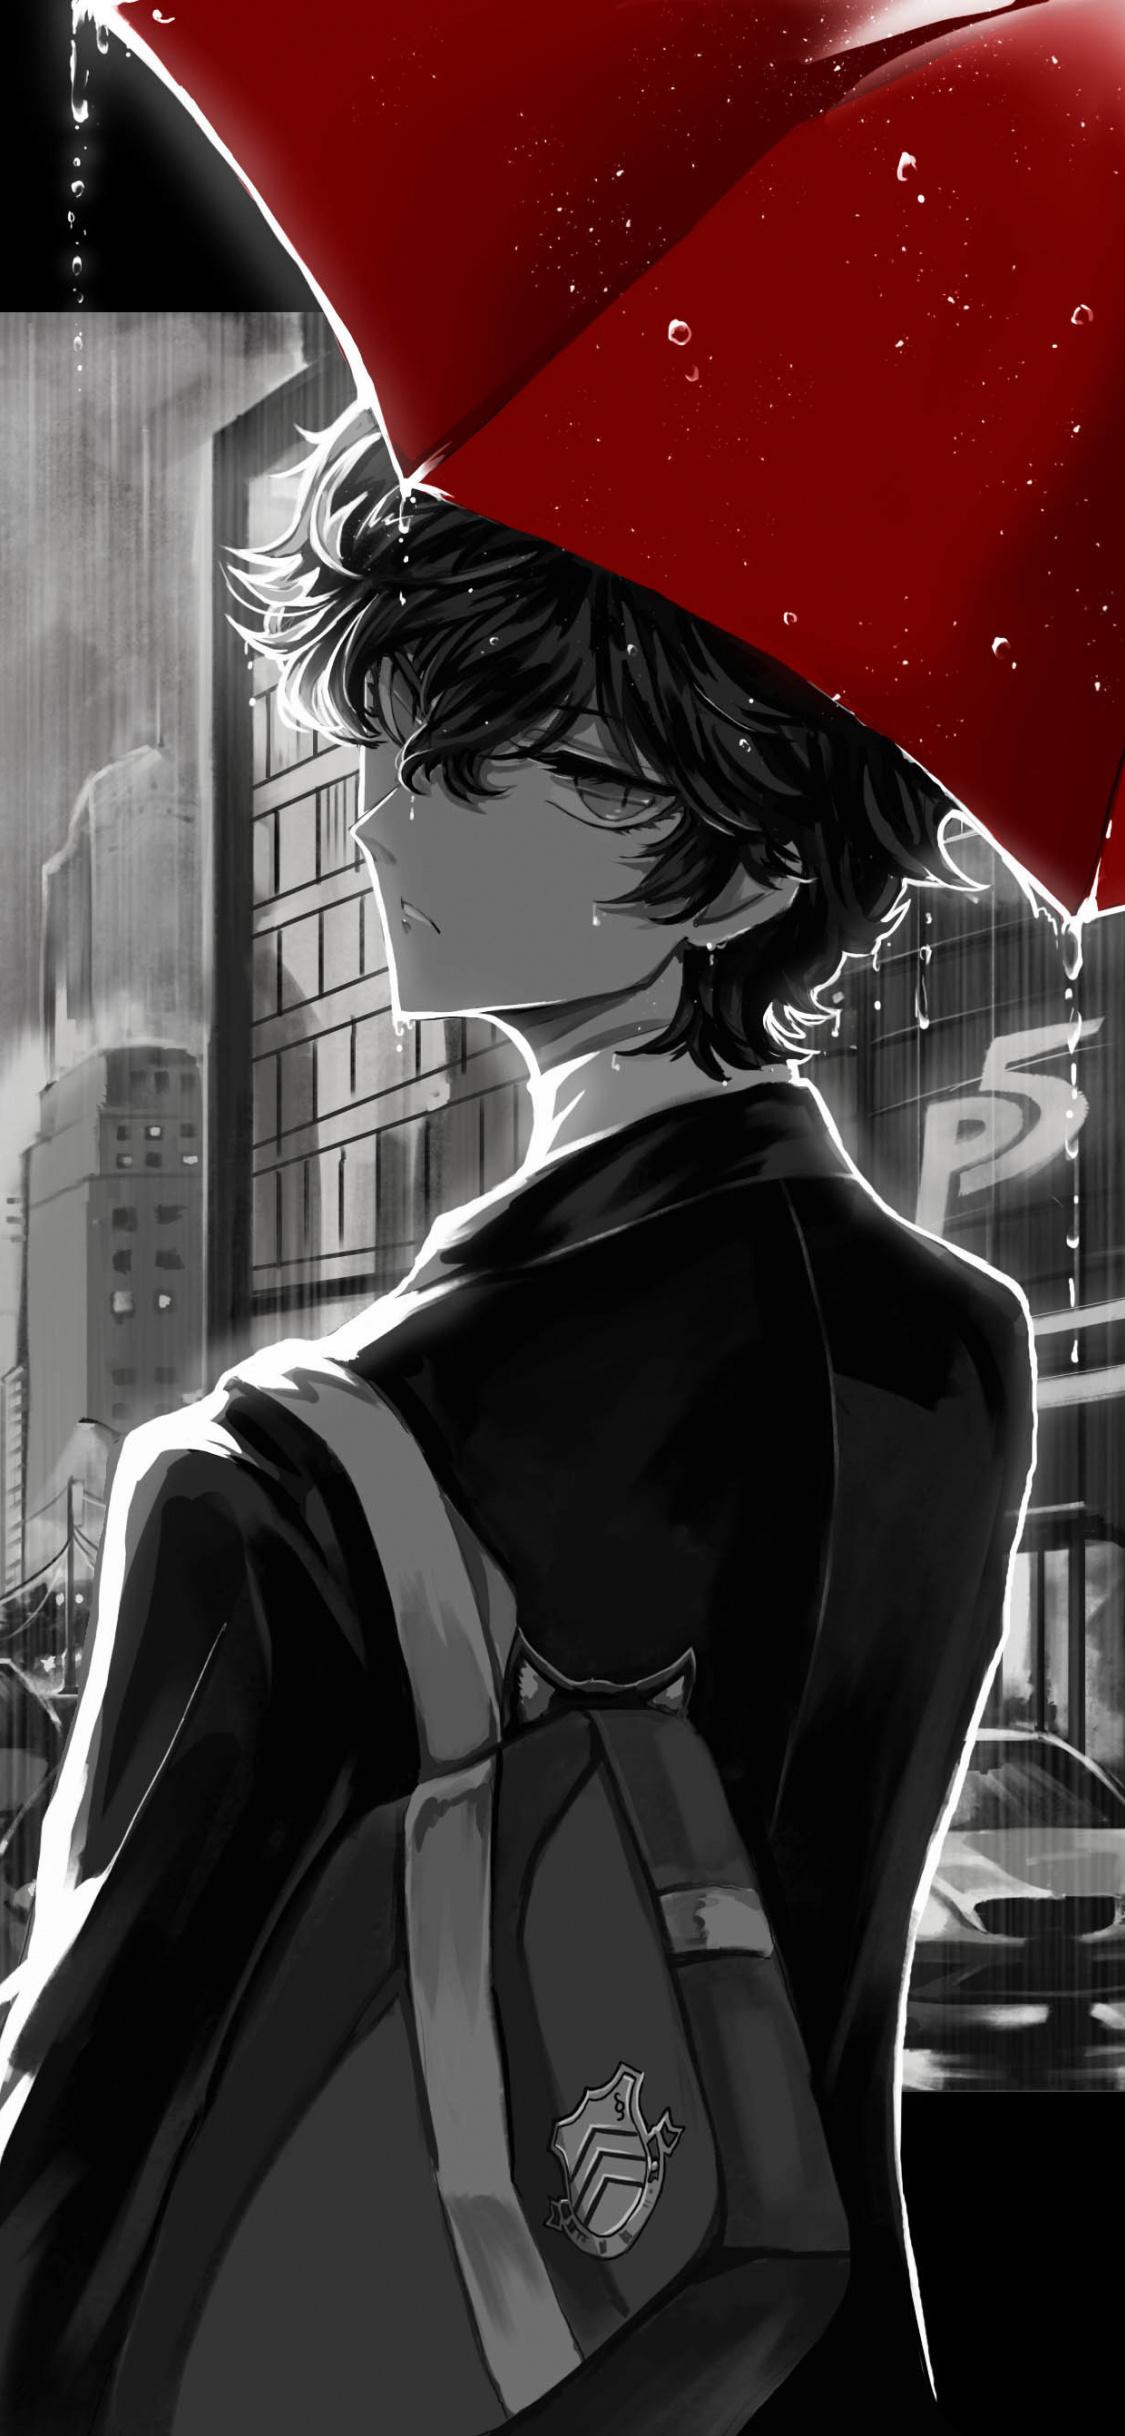 Persona Landscape Phone Wallpapers - Wallpaper Cave